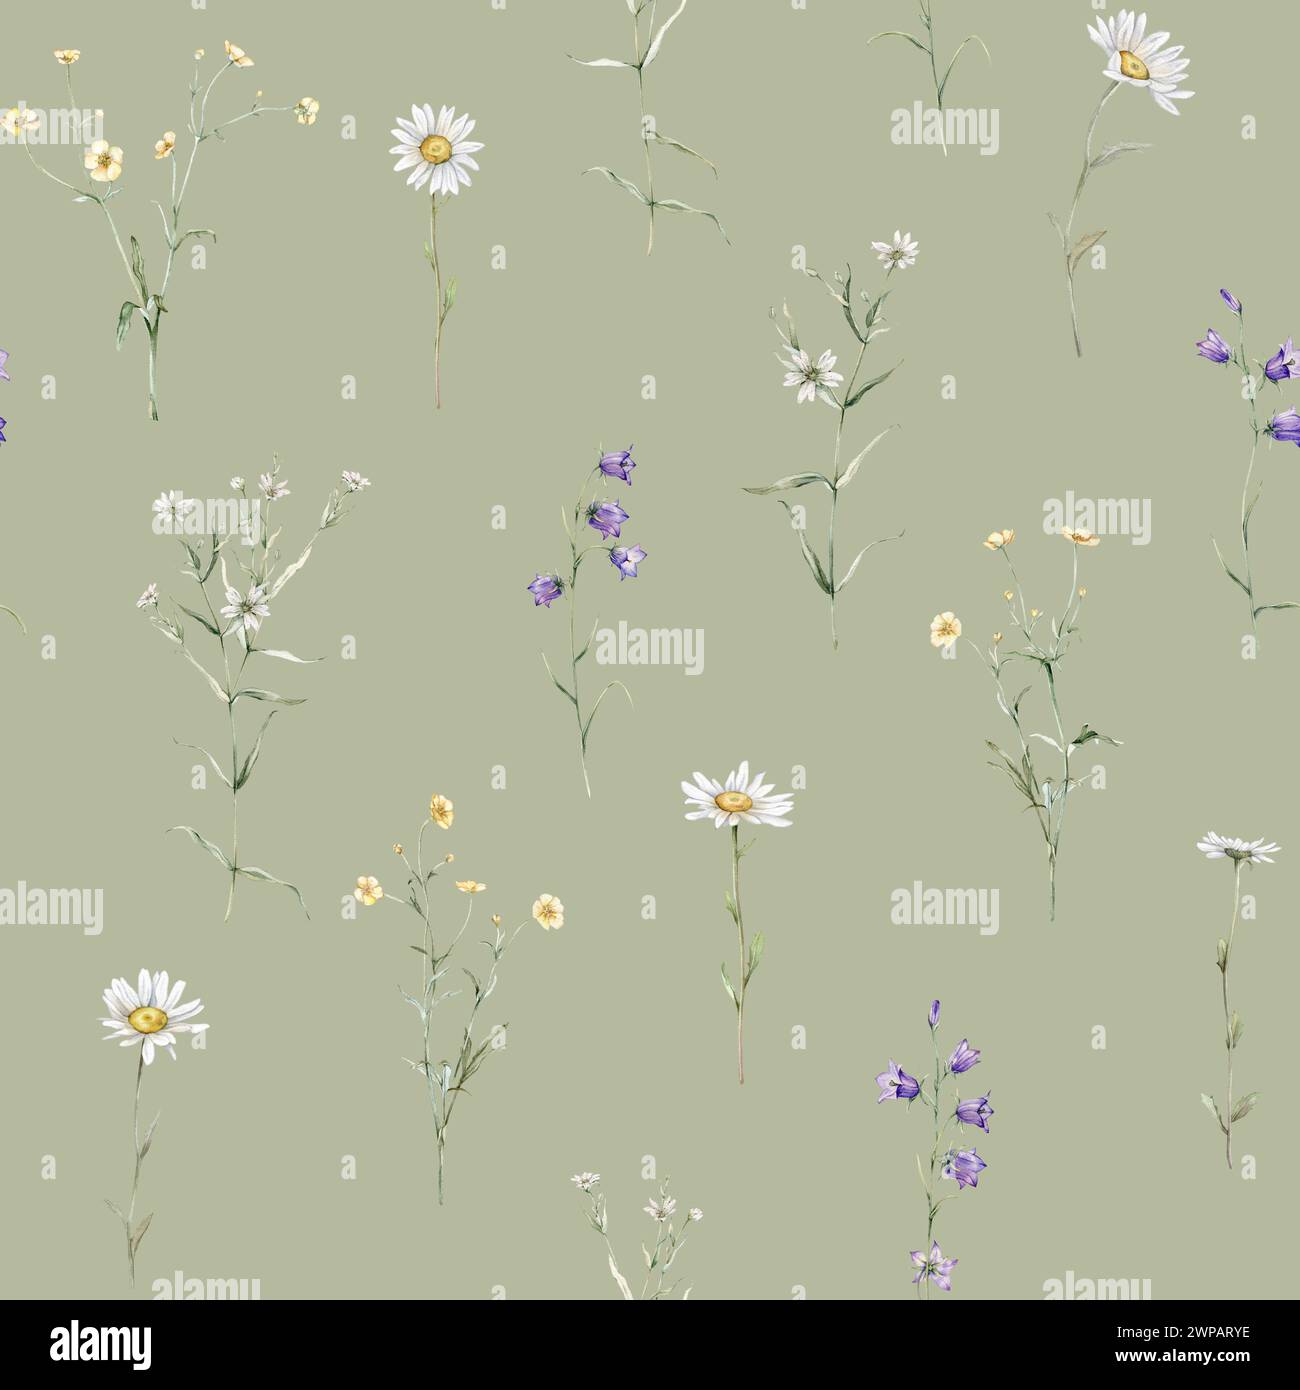 Seamless pattern watercolor meadow flower with white chamomile and violet bluebell. Repeat wallpaper forest flower yellow ranunculus. Hand drawn Stock Photo